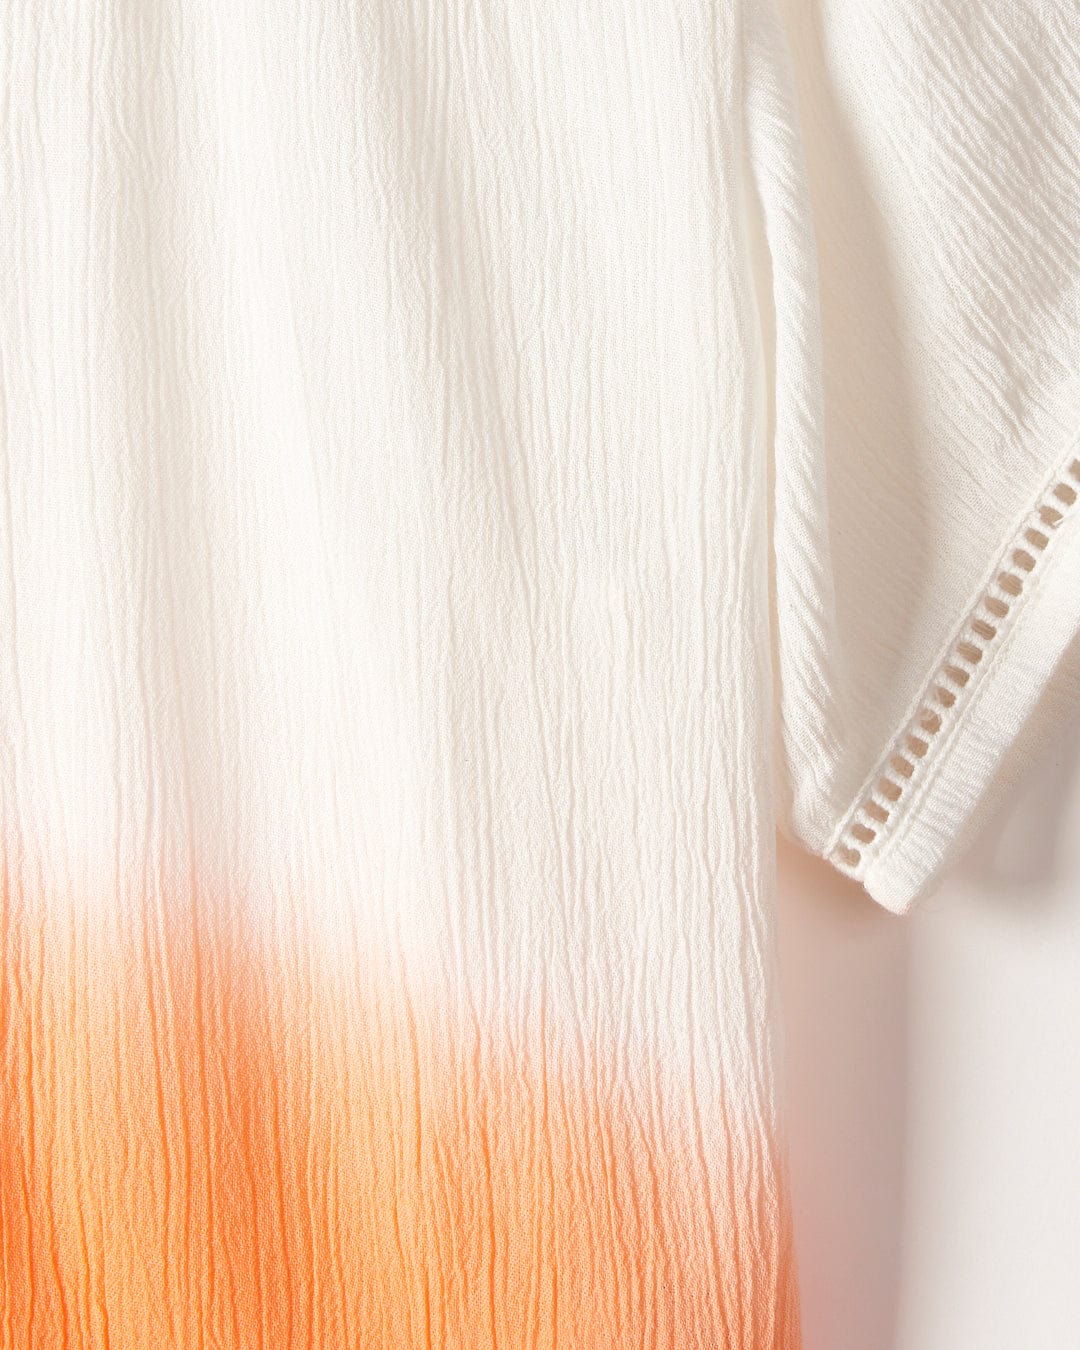 White fabric with a gradient ombre effect at the bottom, hanging vertically with a subtle texture visible, like the Saltrock Raya - Kids Shirt - Orange.